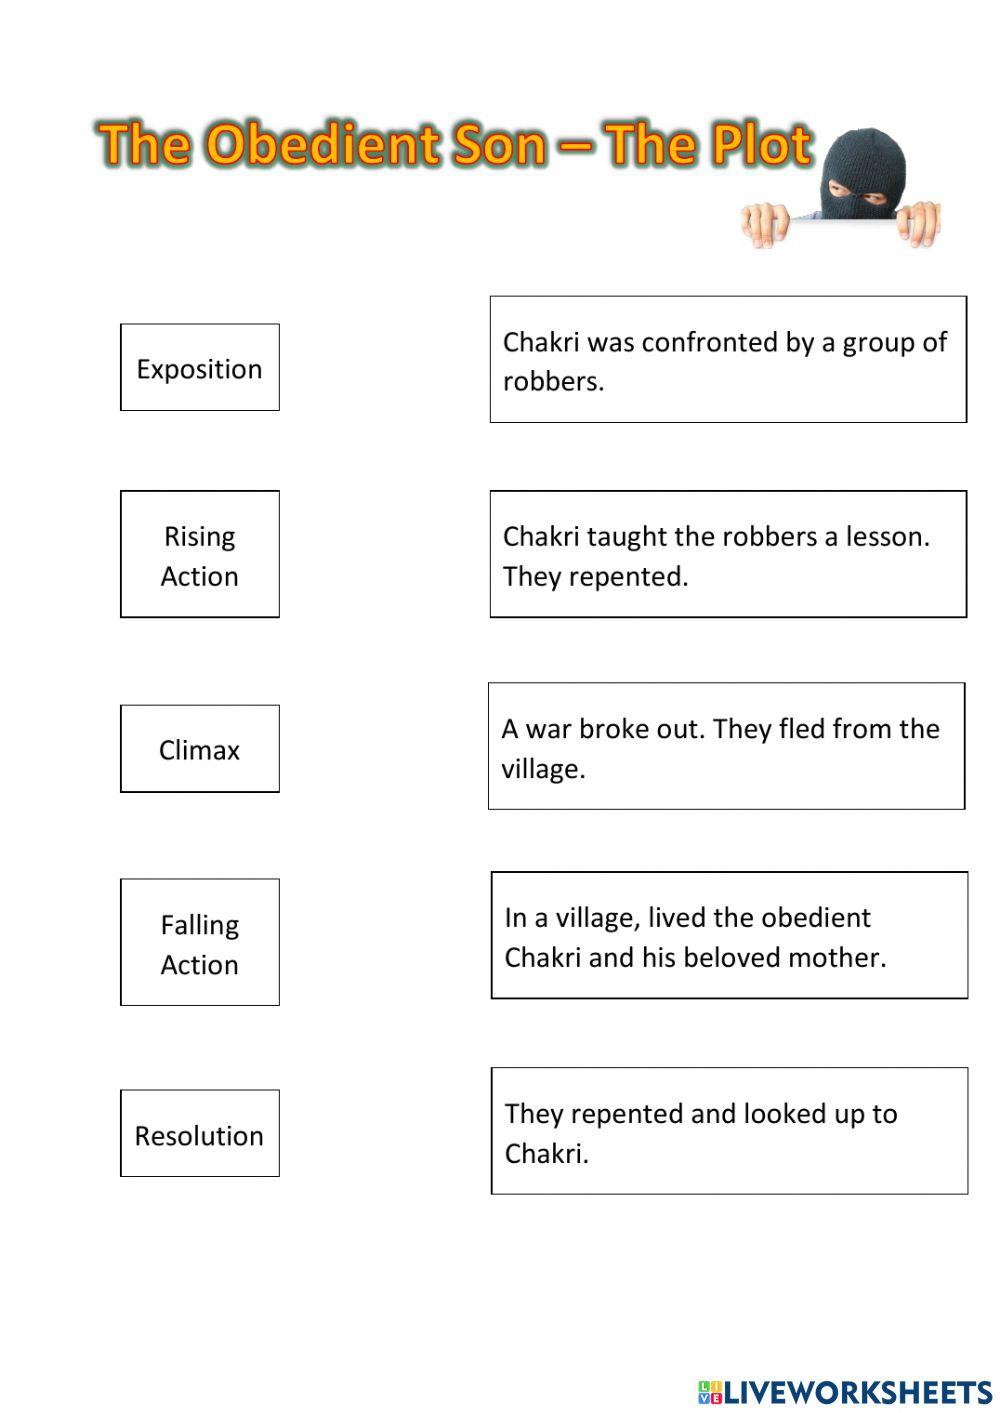 The Obedient Son Plot Exercise